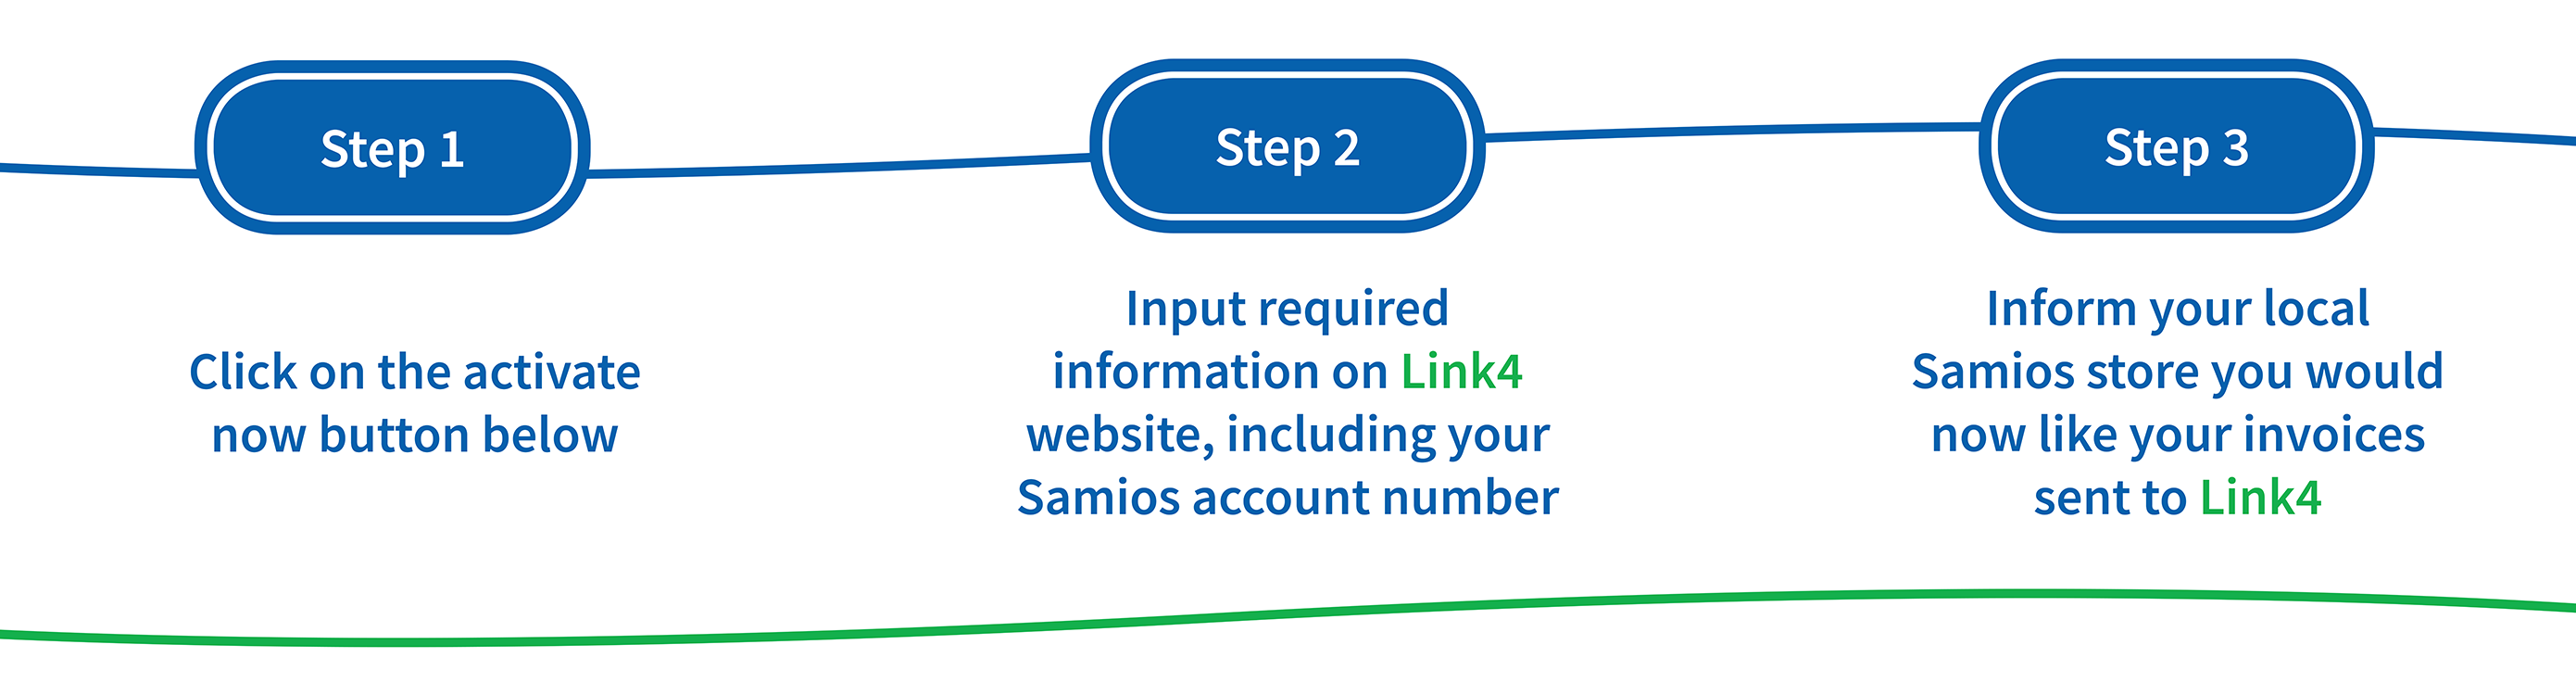 How to Activate Link4